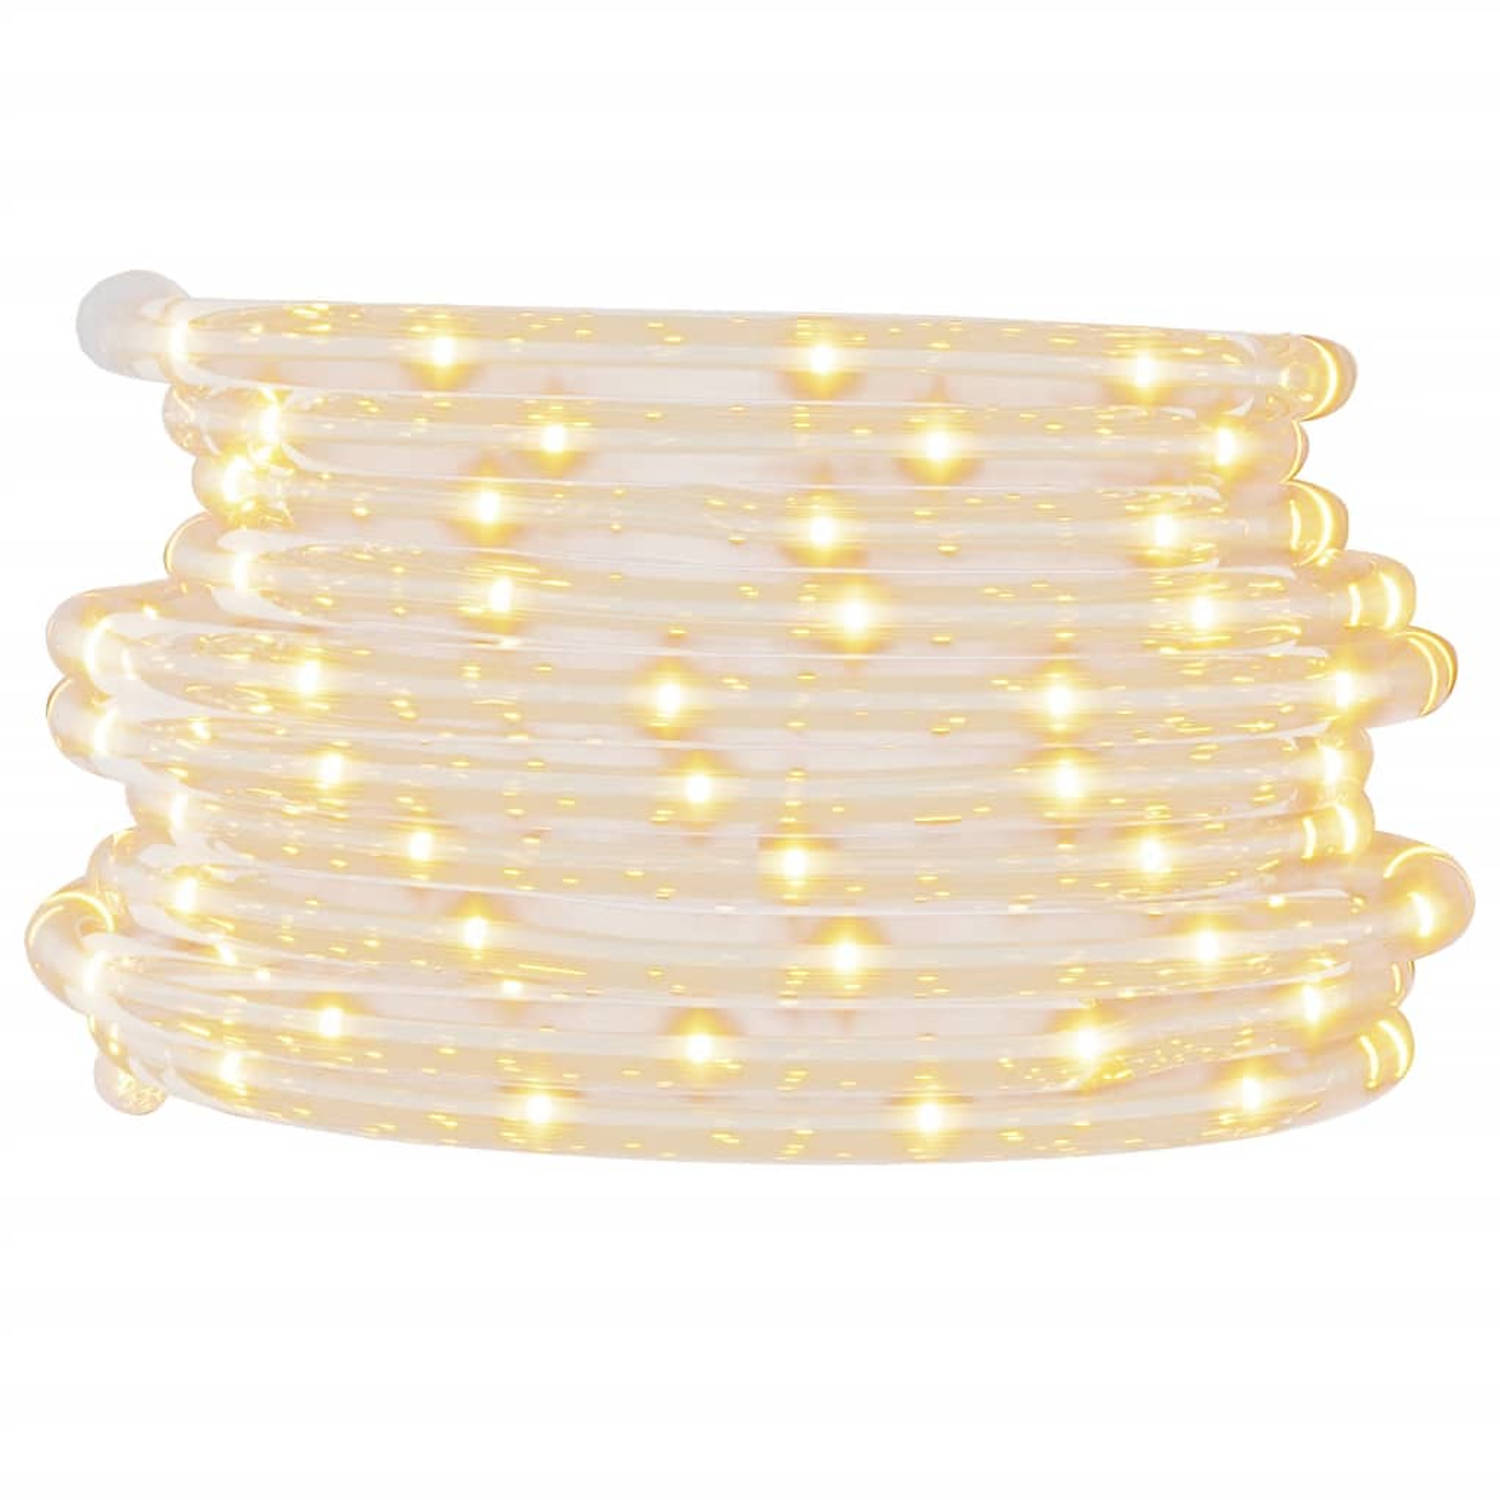 The Living Store Kerstlichtsnoer - Warm Wit - 120 LEDs - 5m IP44 - 8W - Plug-in